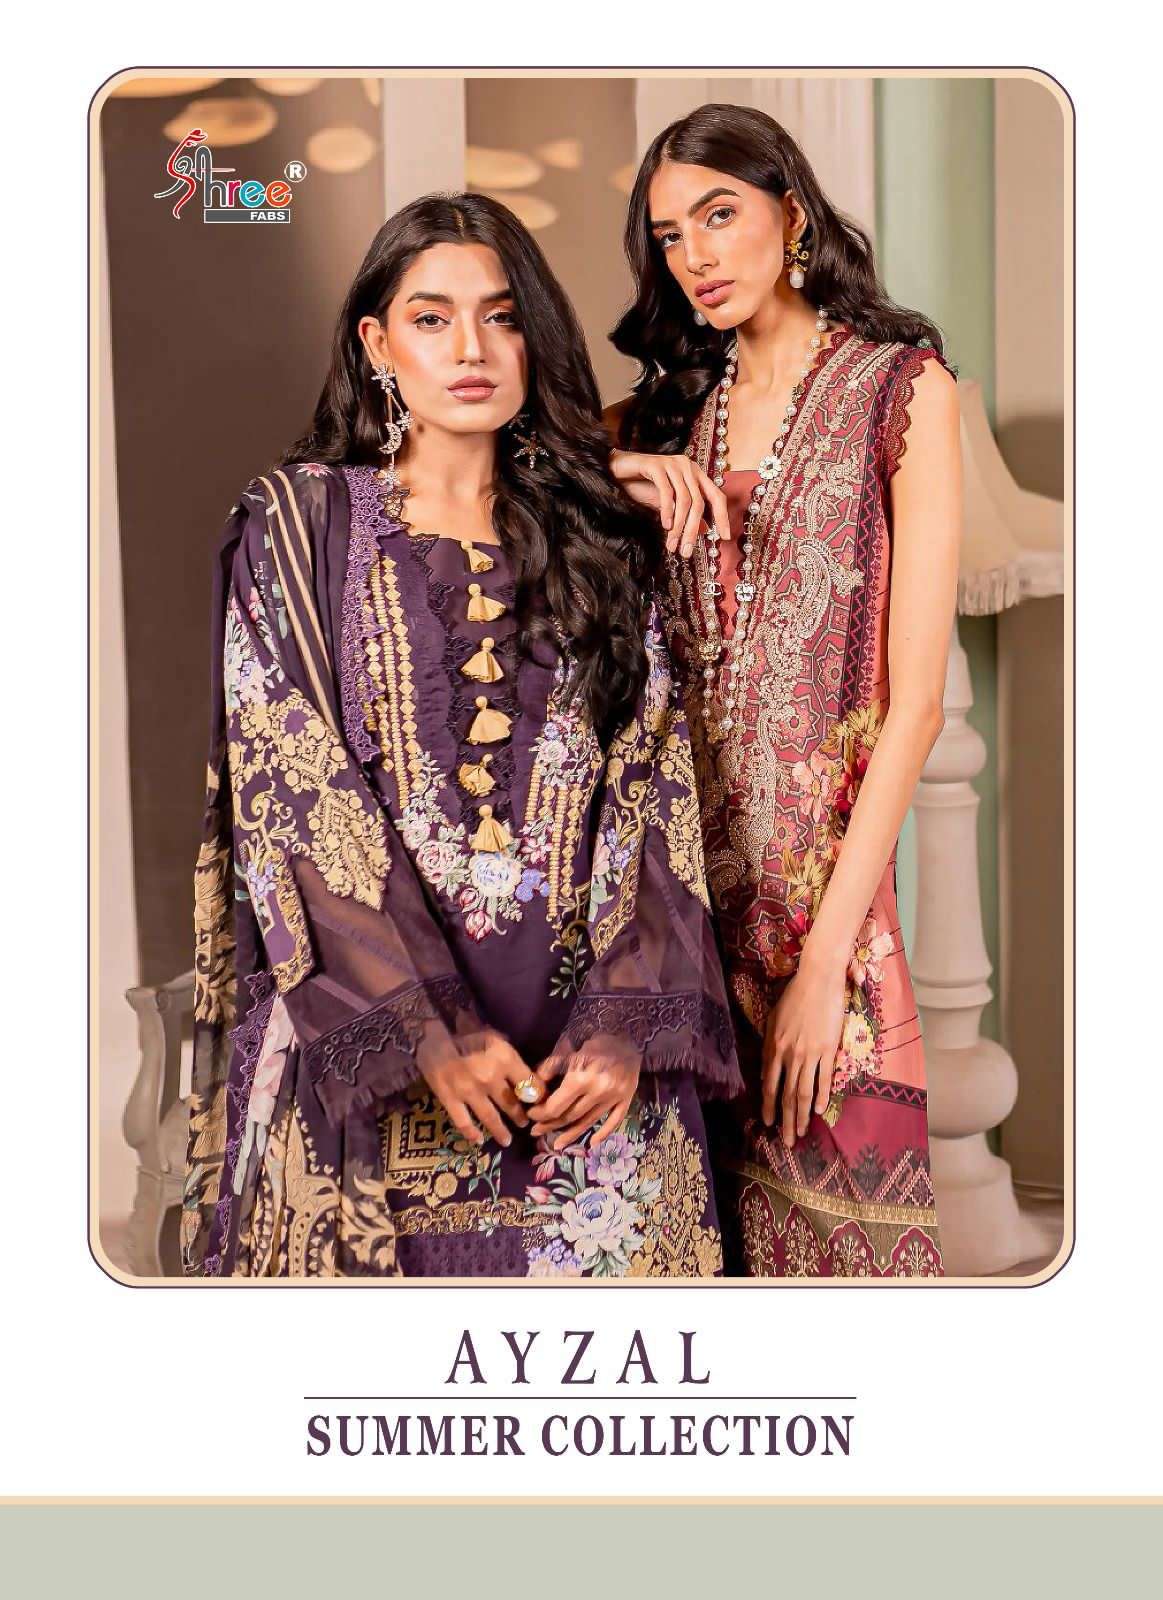 SHREE FABS AYZAL SUMMER COLLECTION COTTON EMBROIDERY SALWAR ...